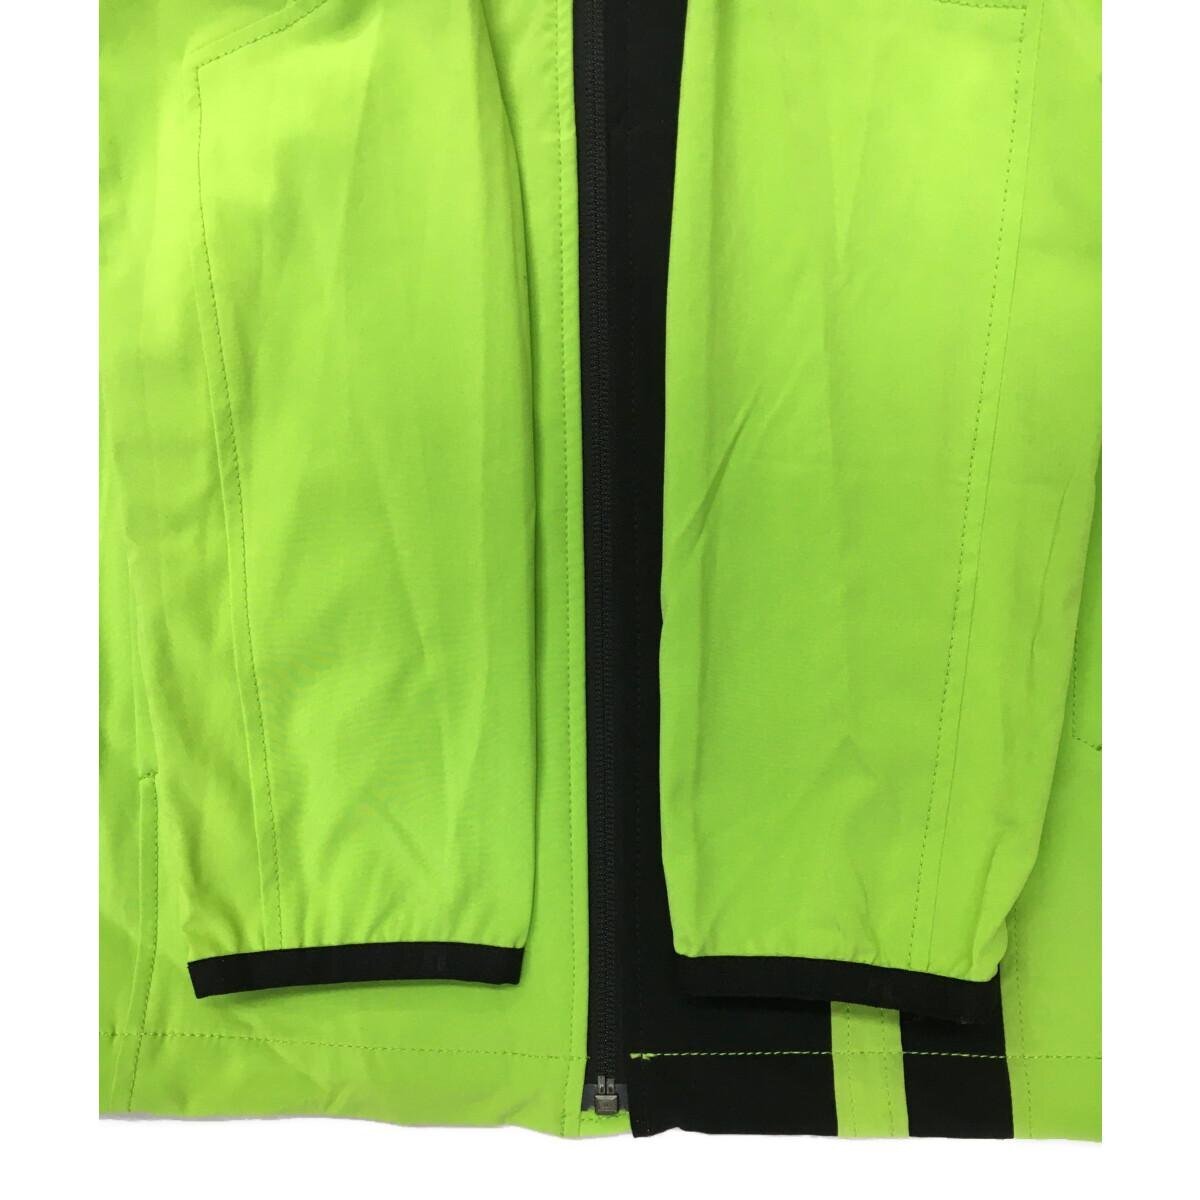 coco*J. Lindberg * long sleeve full Zip blouson * outer * yellow green × black * light green * spring autumn *S* used * letter pack post service plus shipping possible *88044